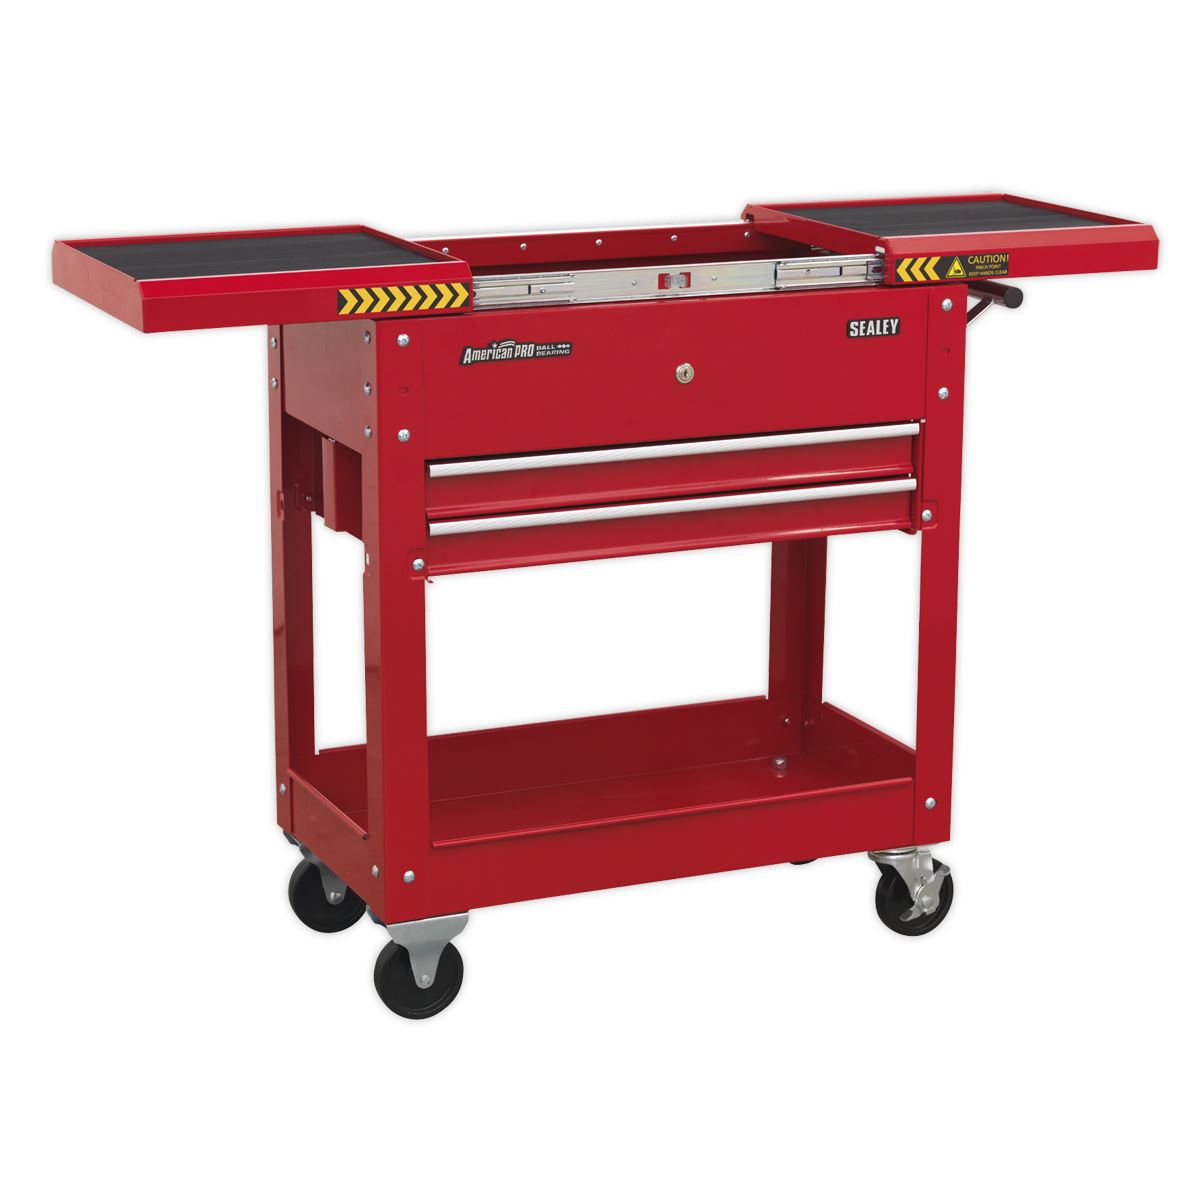 Sealey American Pro Mobile Tool & Parts Trolley - Red